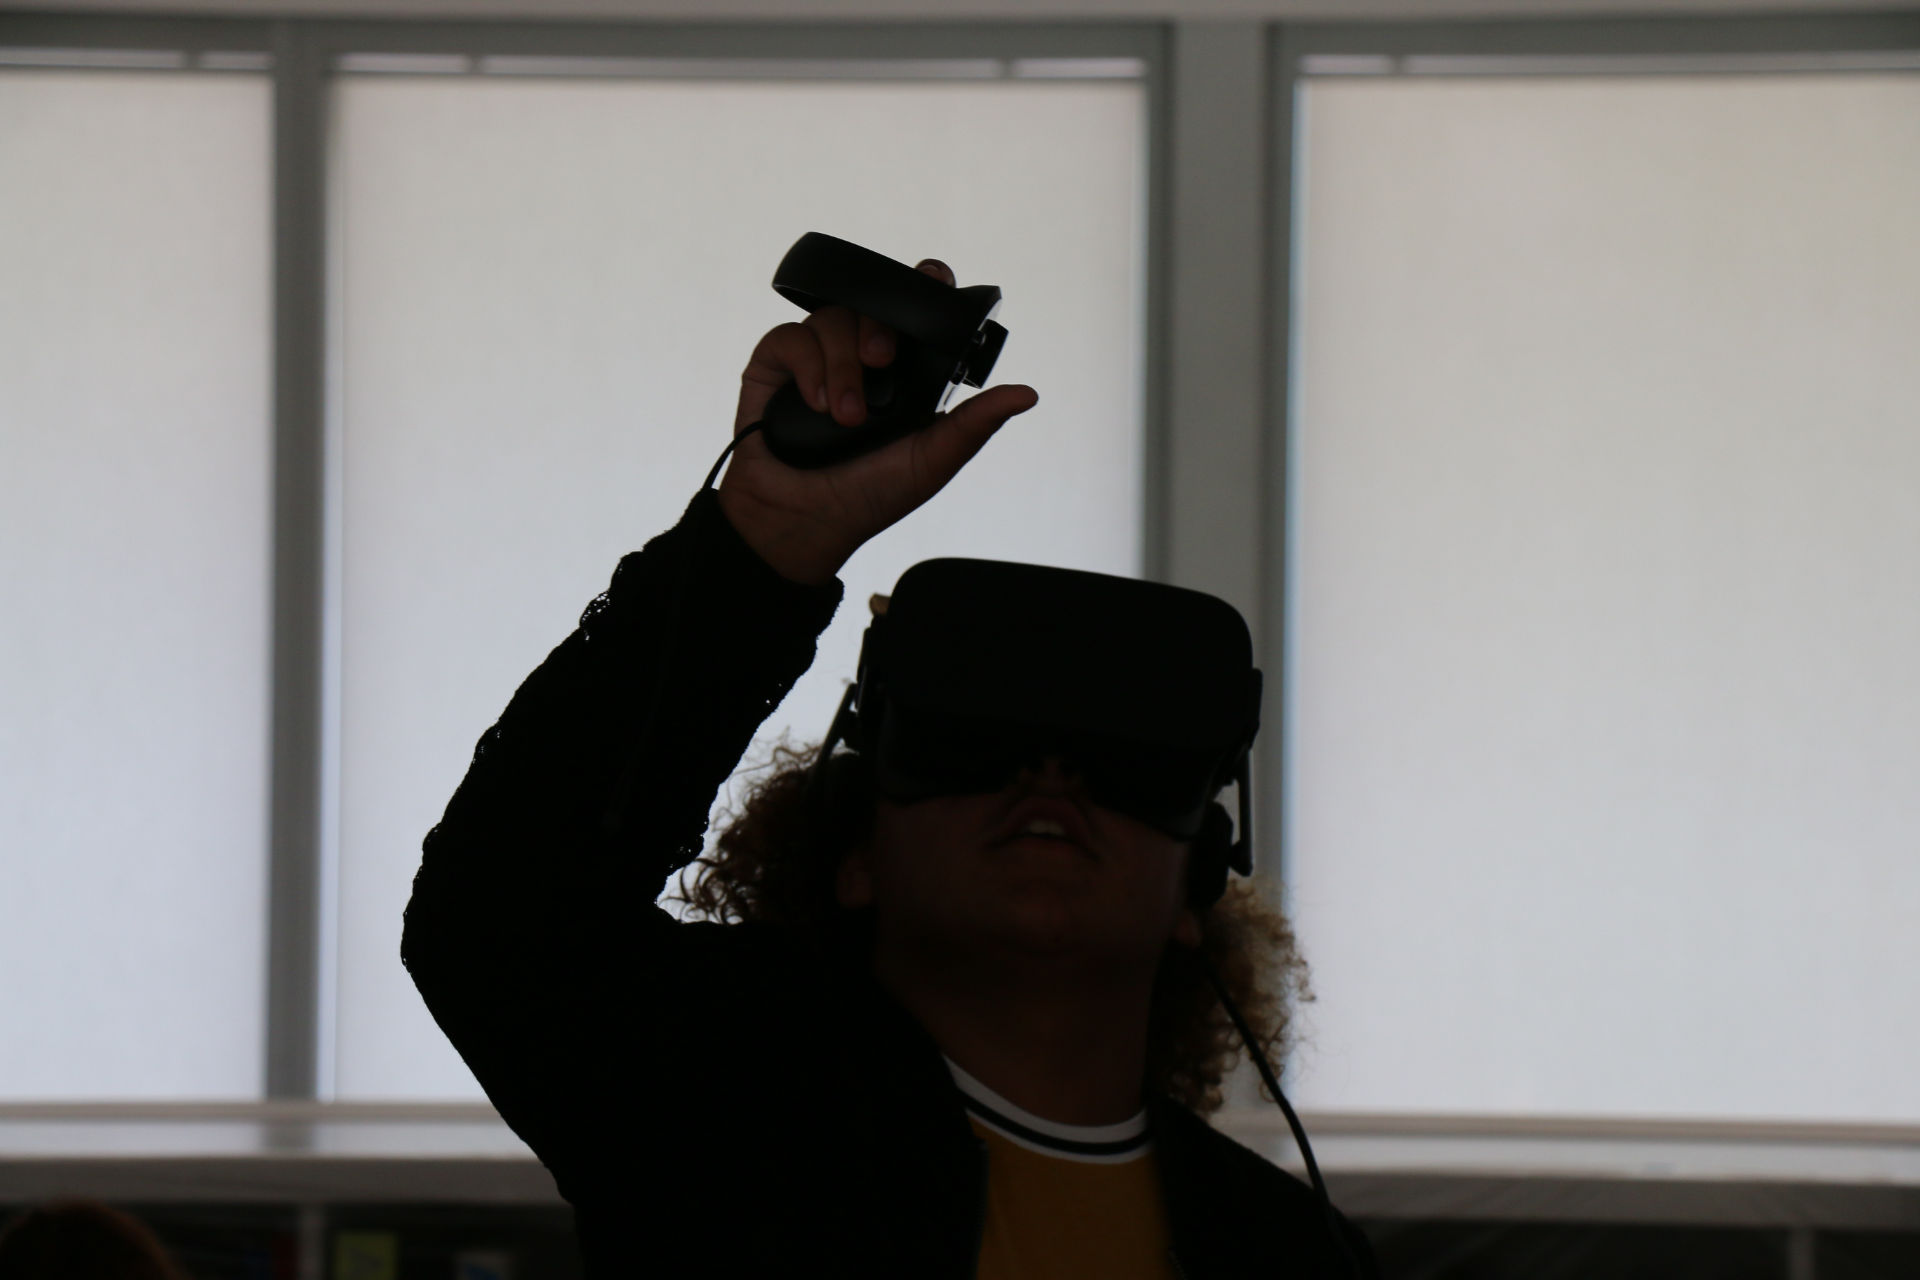 A kid putting her hand up while using an Oculus